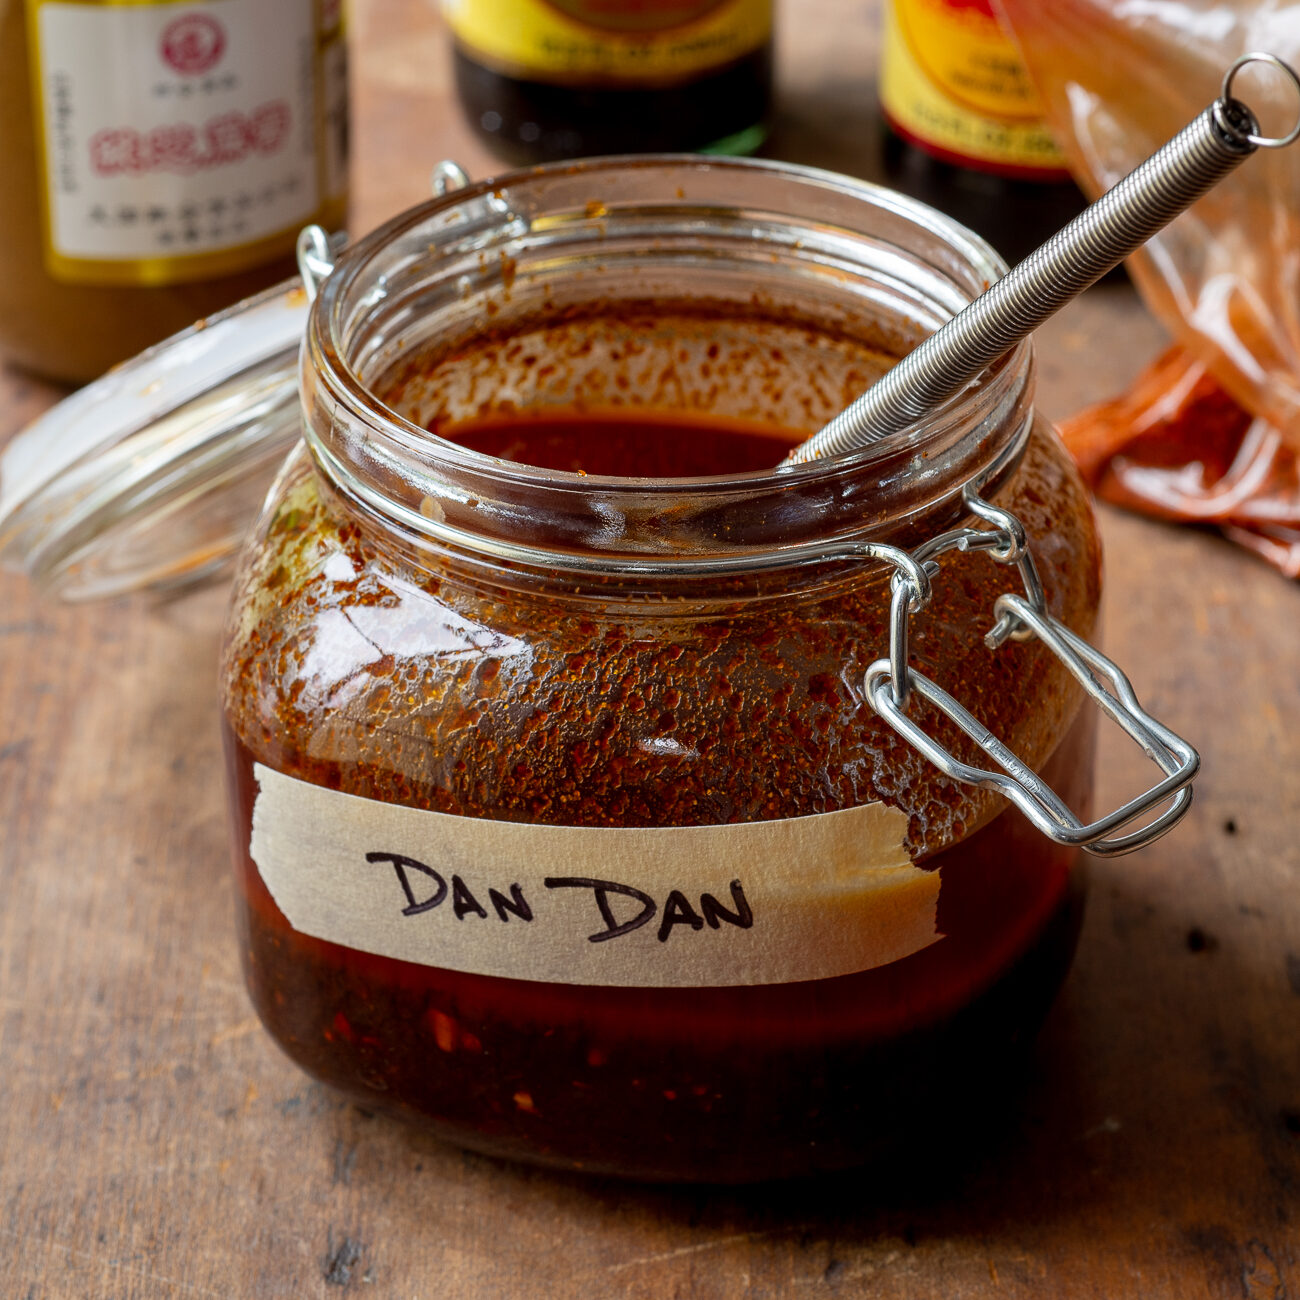 Jar with hinged lid with dark red sauce and masking tape label that says "DAN DAN" 